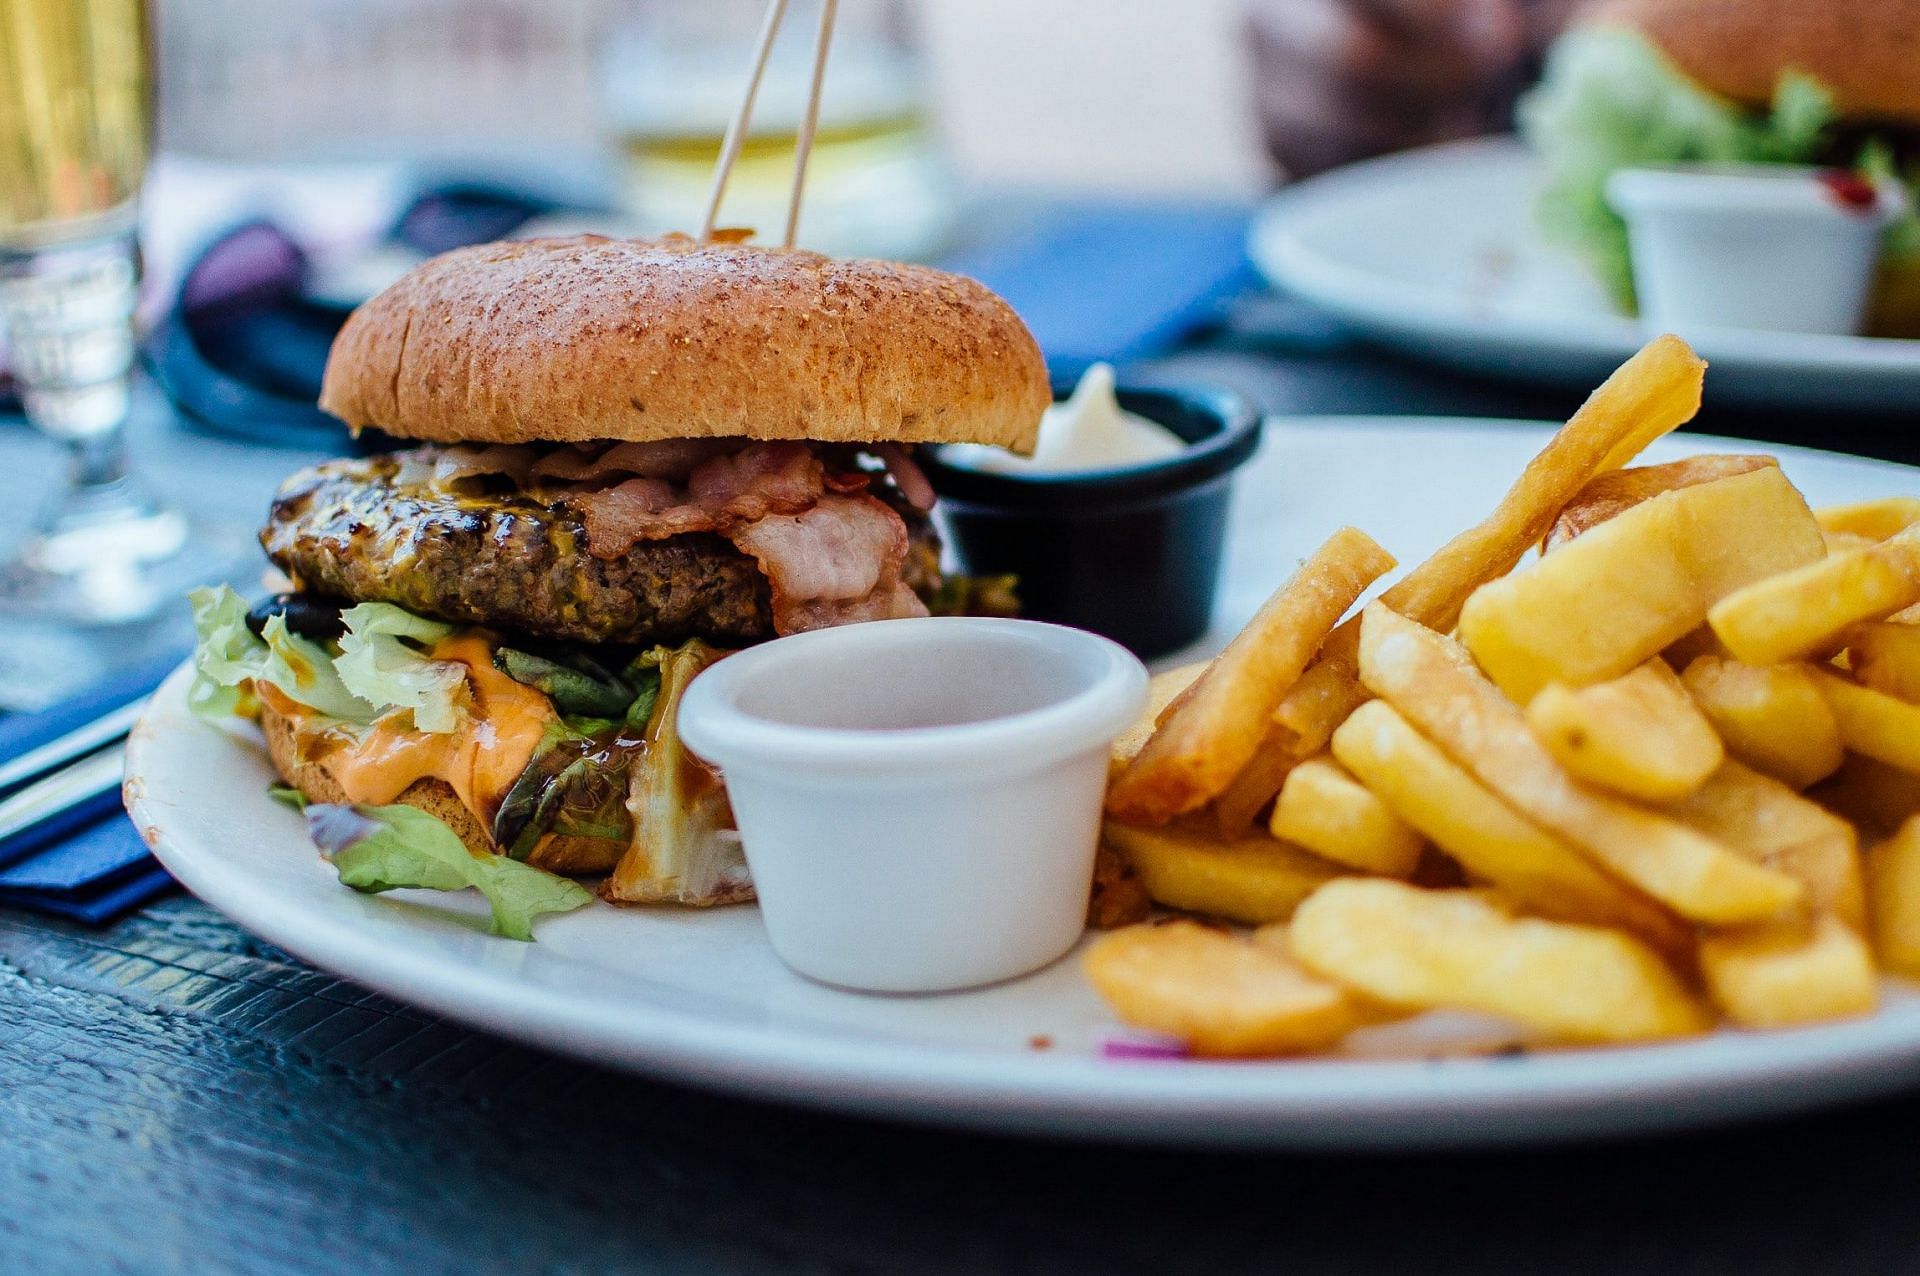 Junk foods can cause obesity and diabetes (Image via Unsplash/Robin Stickel)